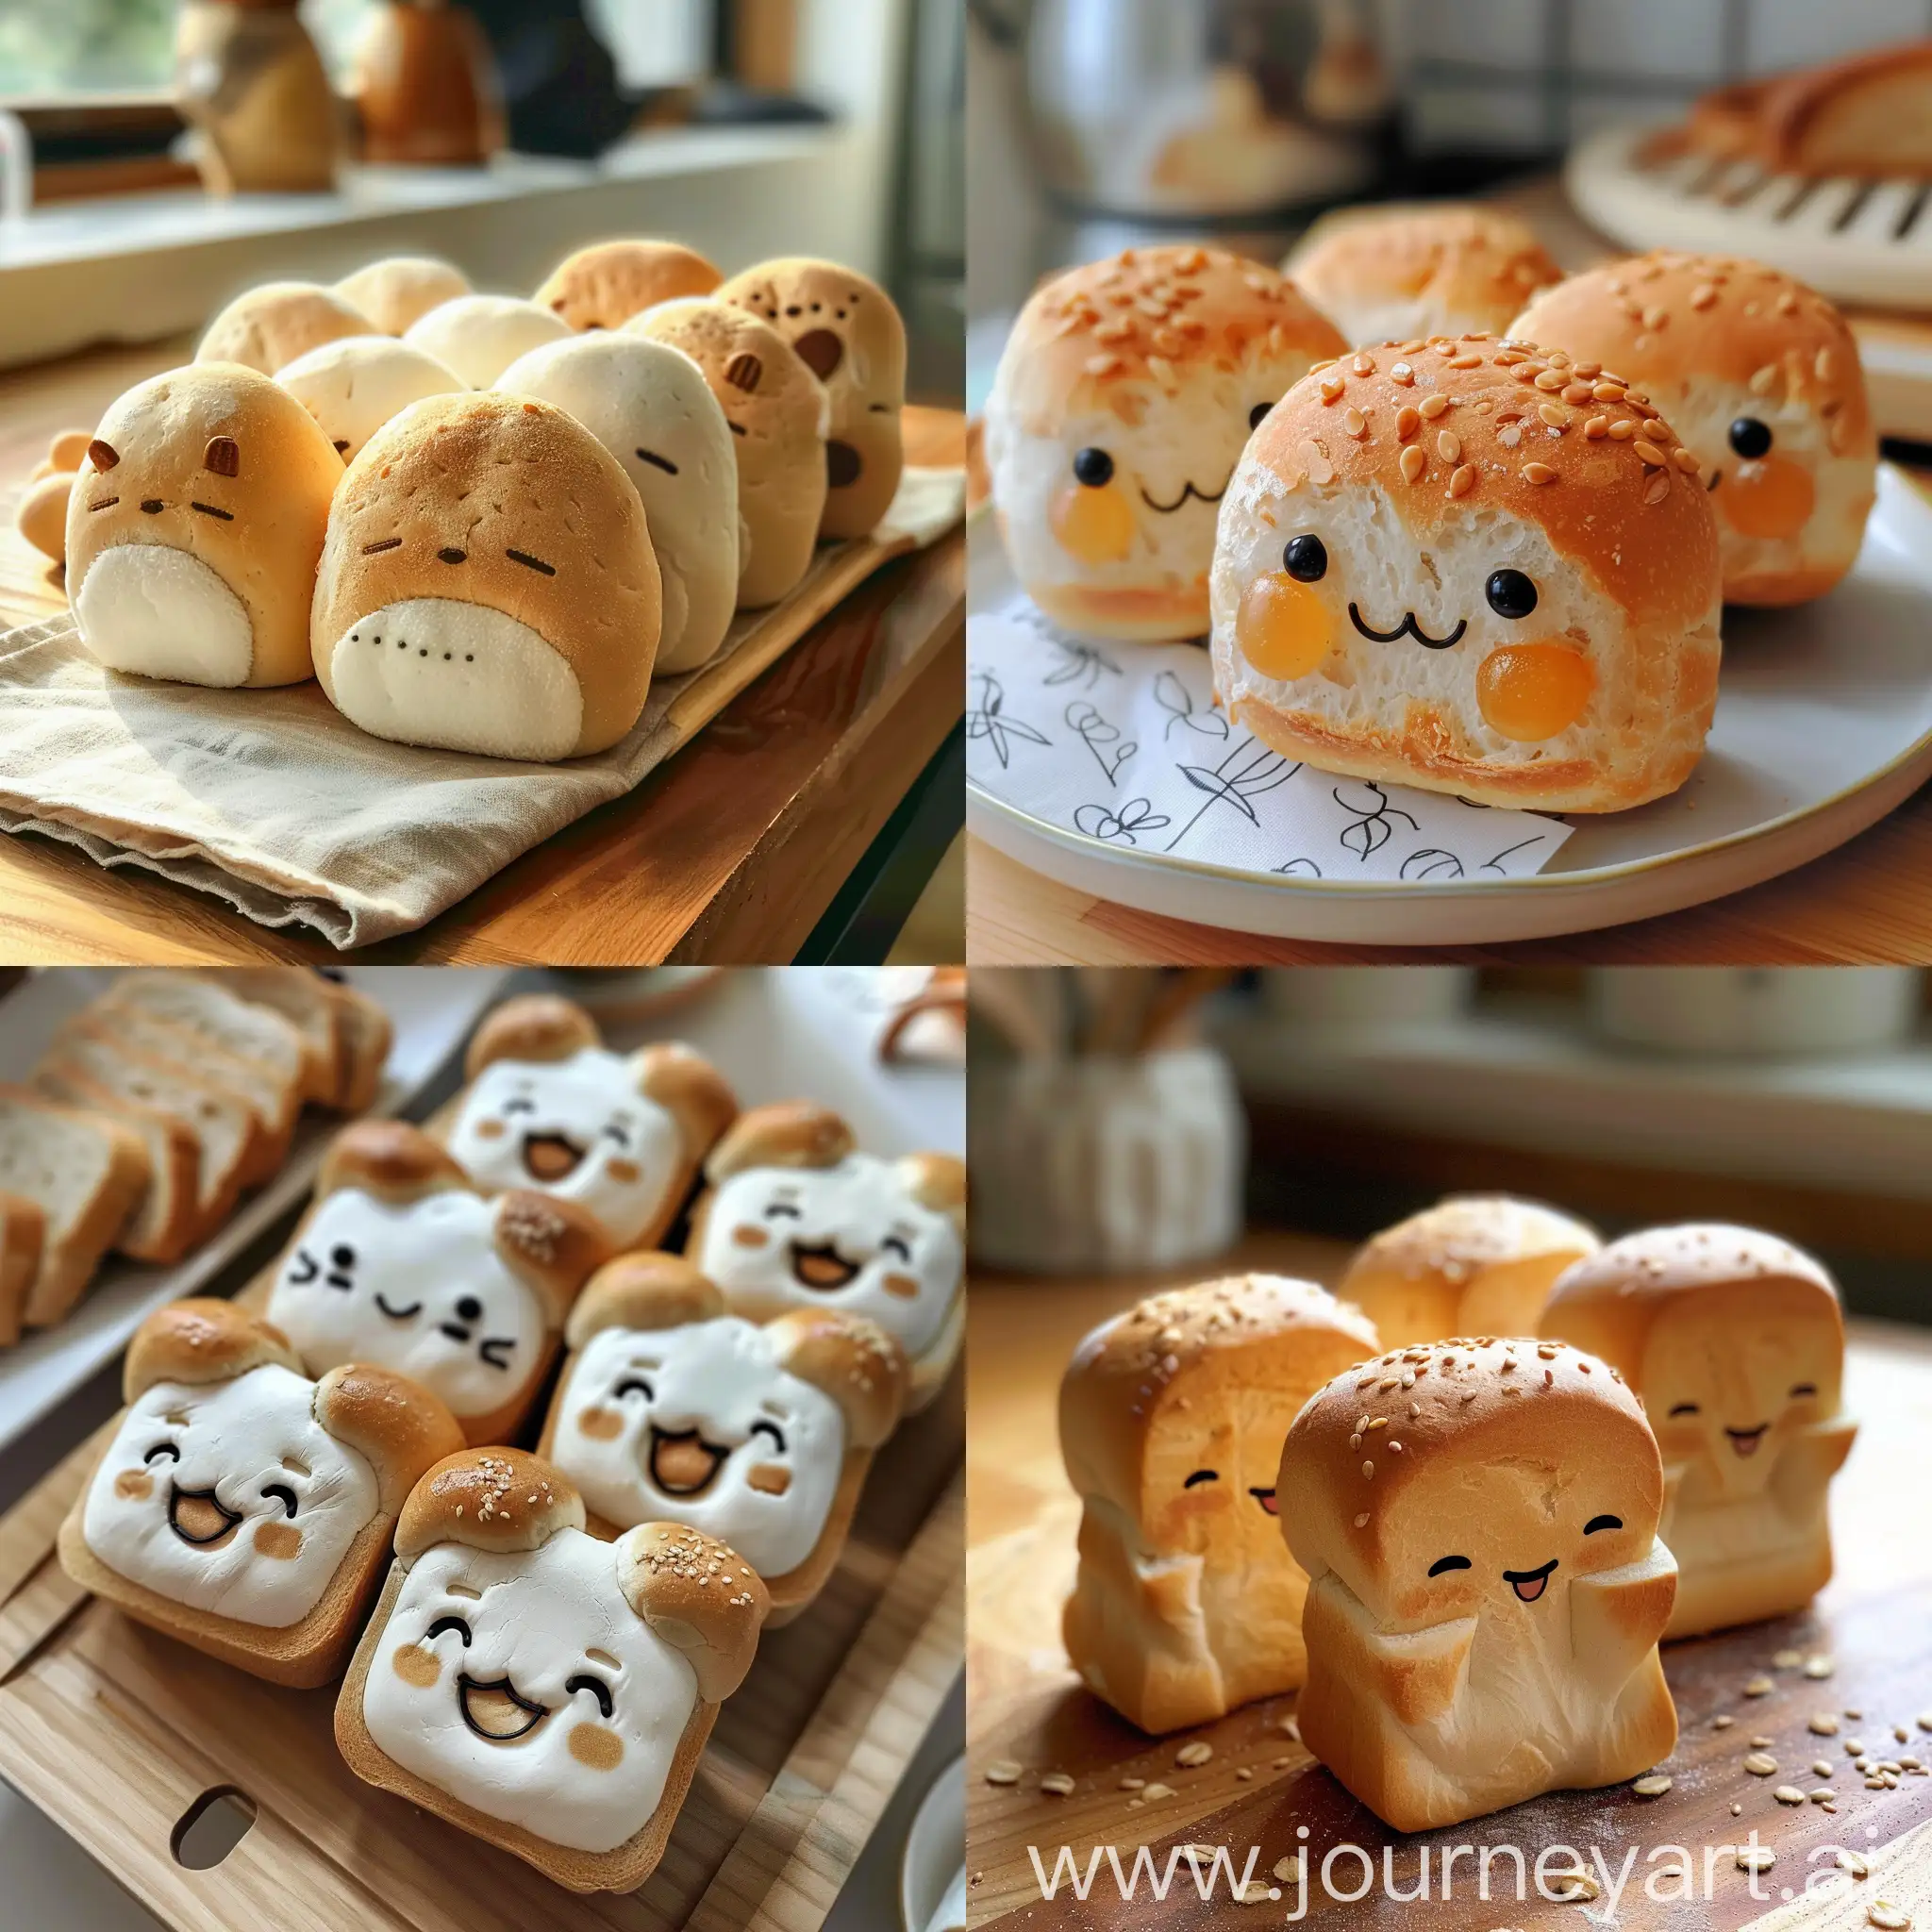 Adorable-Bread-Creations-A-Delightful-Collection-of-Cute-Bread-Art